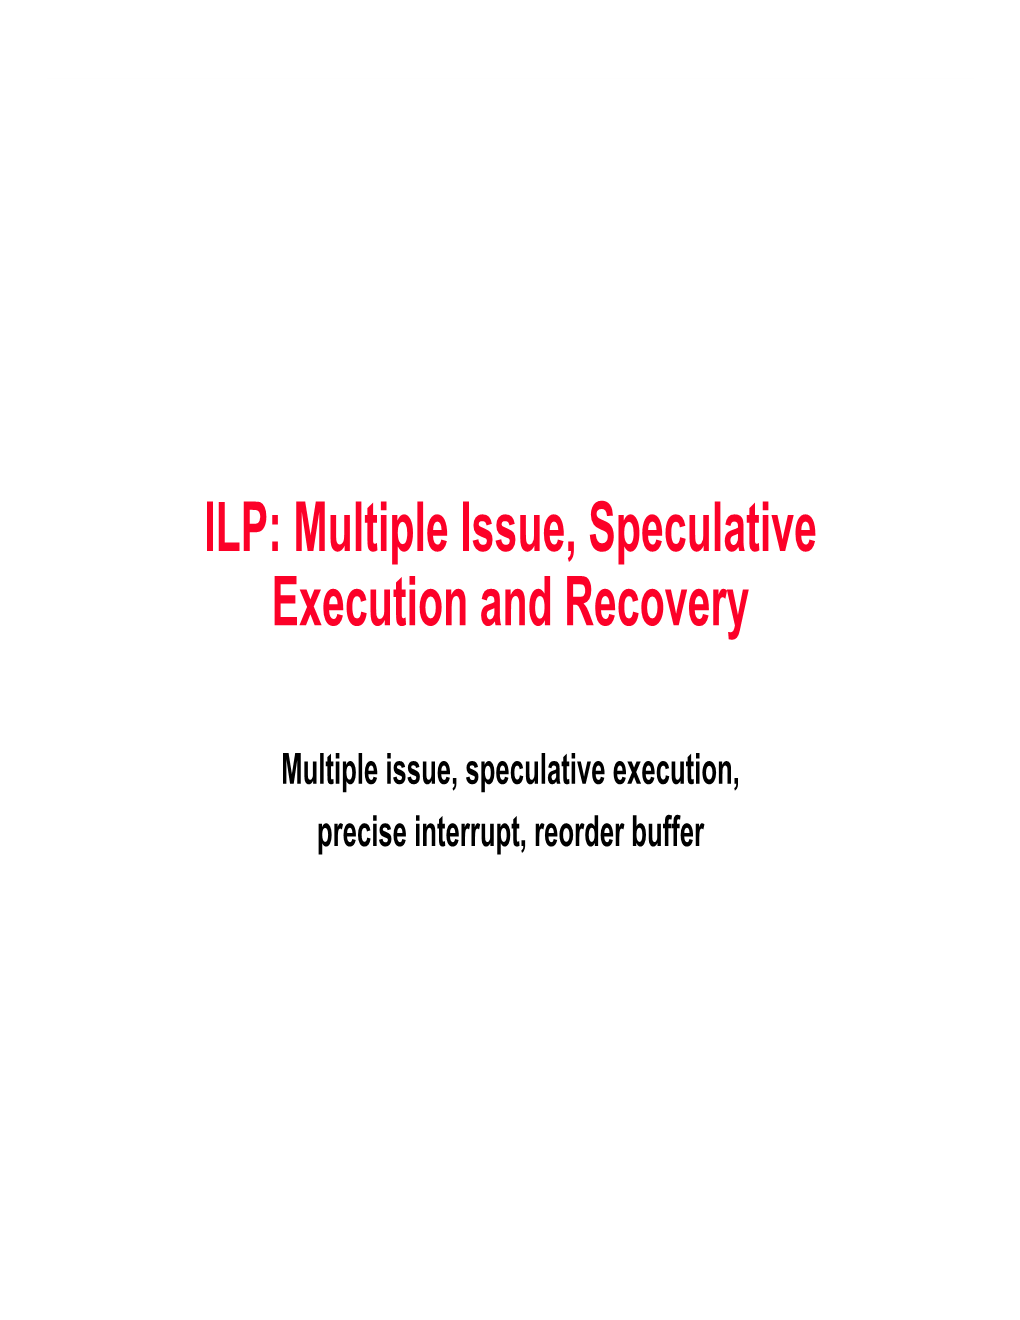 Multiple Issue, Speculative Execution and Recovery